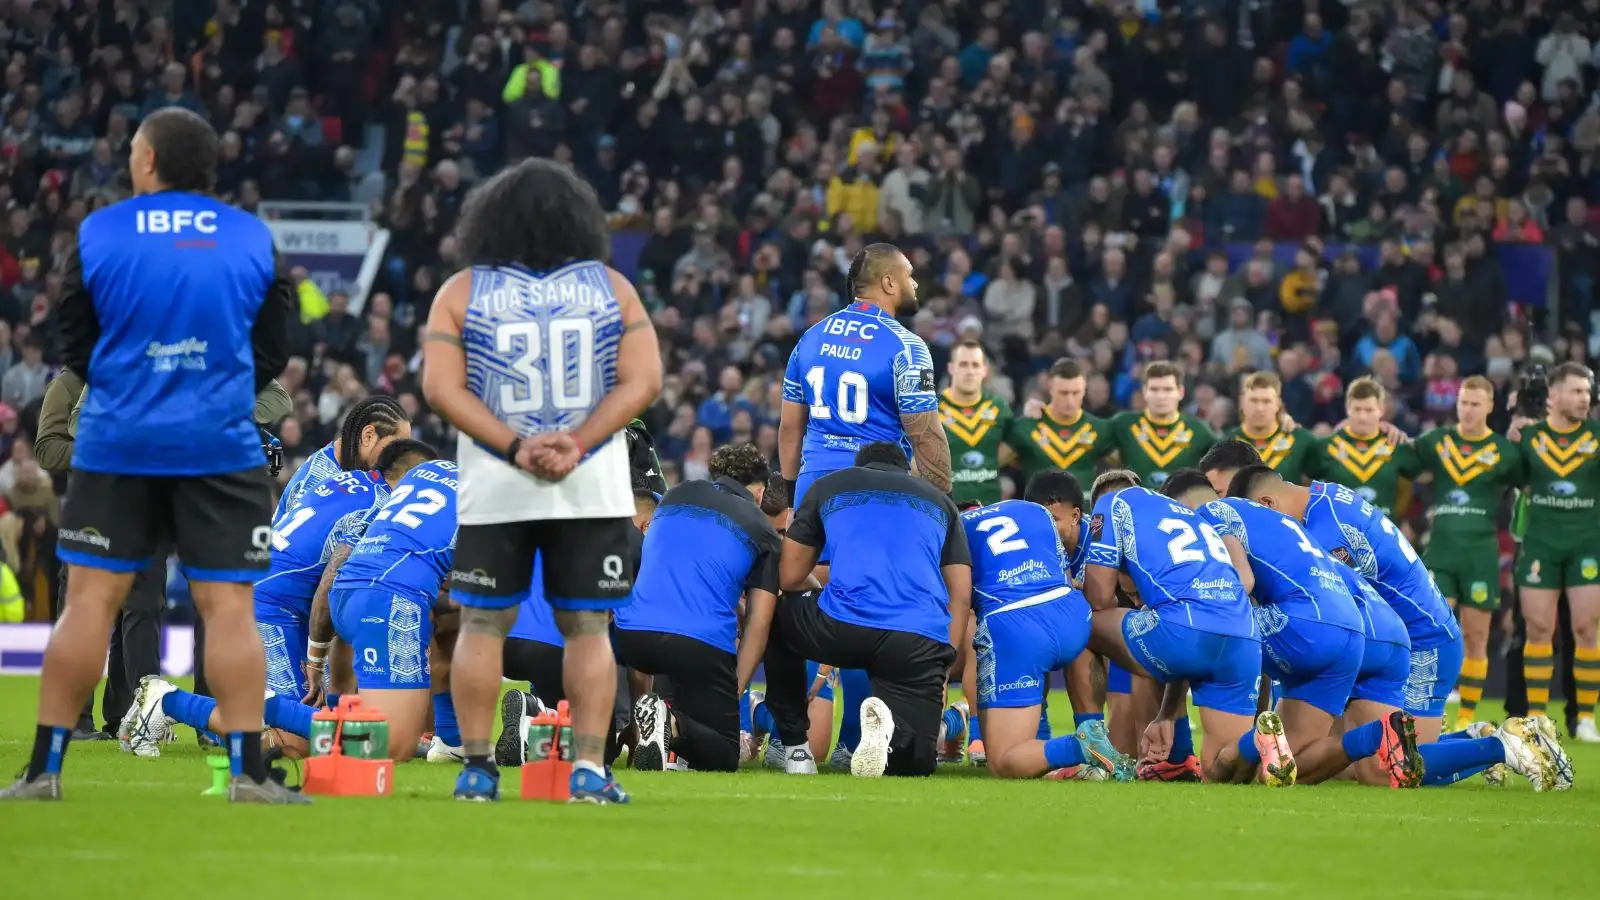 Samoa and Australia featured in the delayed 2021 World Cup final at Old Trafford, Manchester. Photo by Craig Cresswell/Alamy Live News.